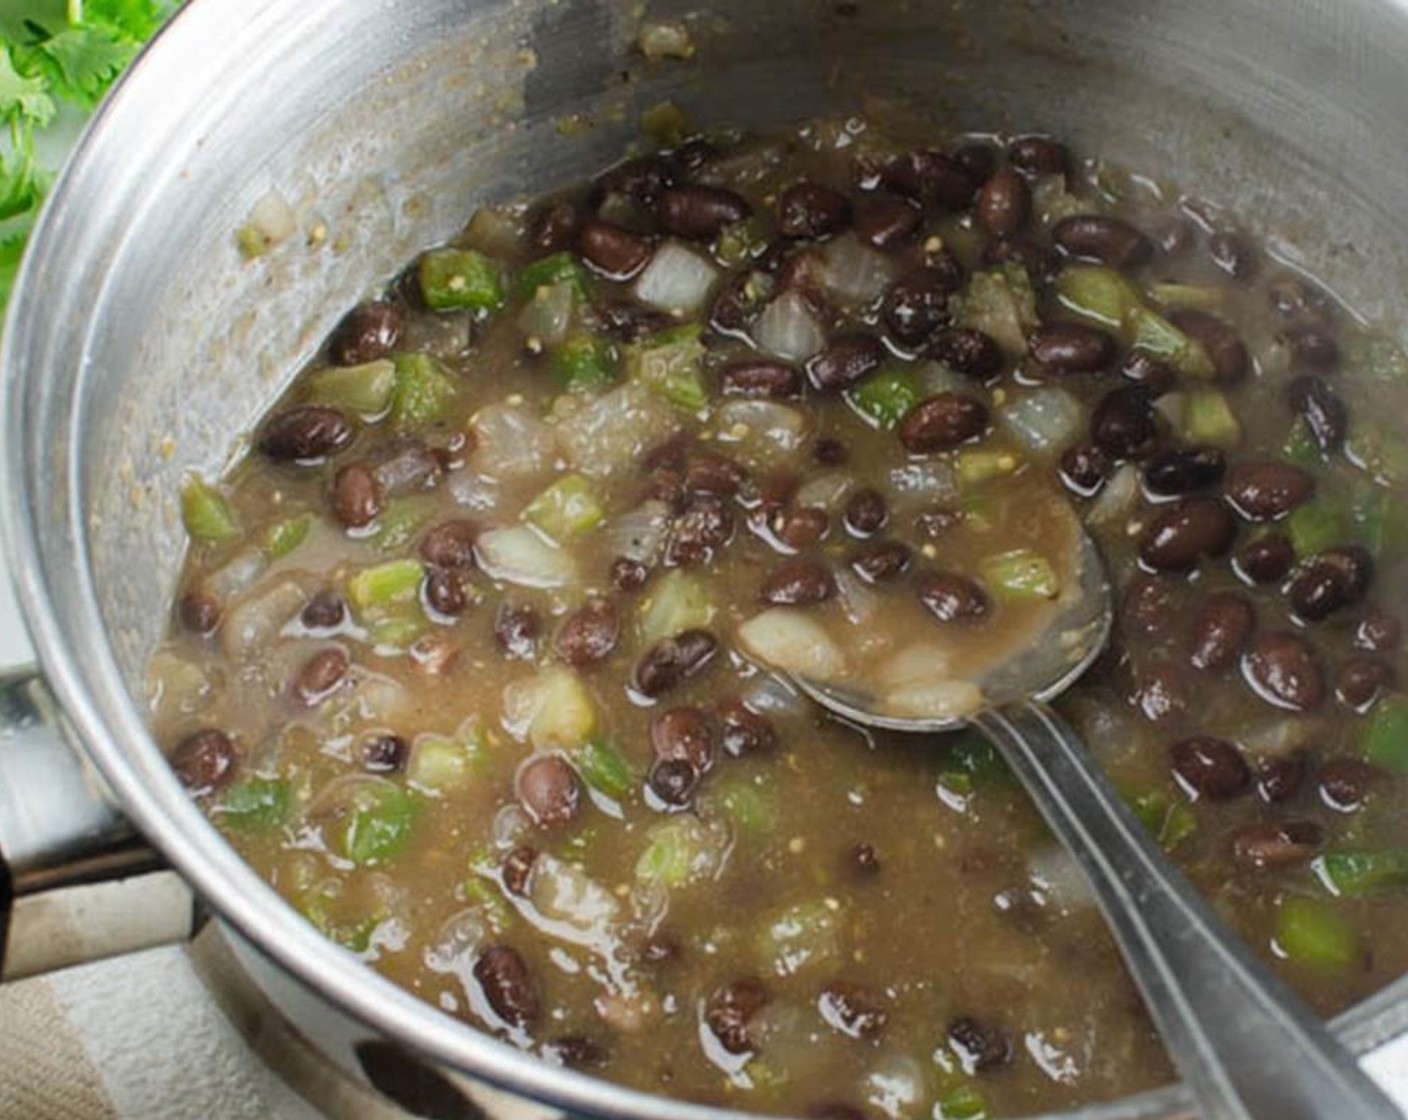 step 8 Stir in the Canned Black Beans (1 cup) (liquid and all) and Salsa Verde (1/4 cup). Heat to boil and reduce heat to a medium simmer, cook for 5 minutes.